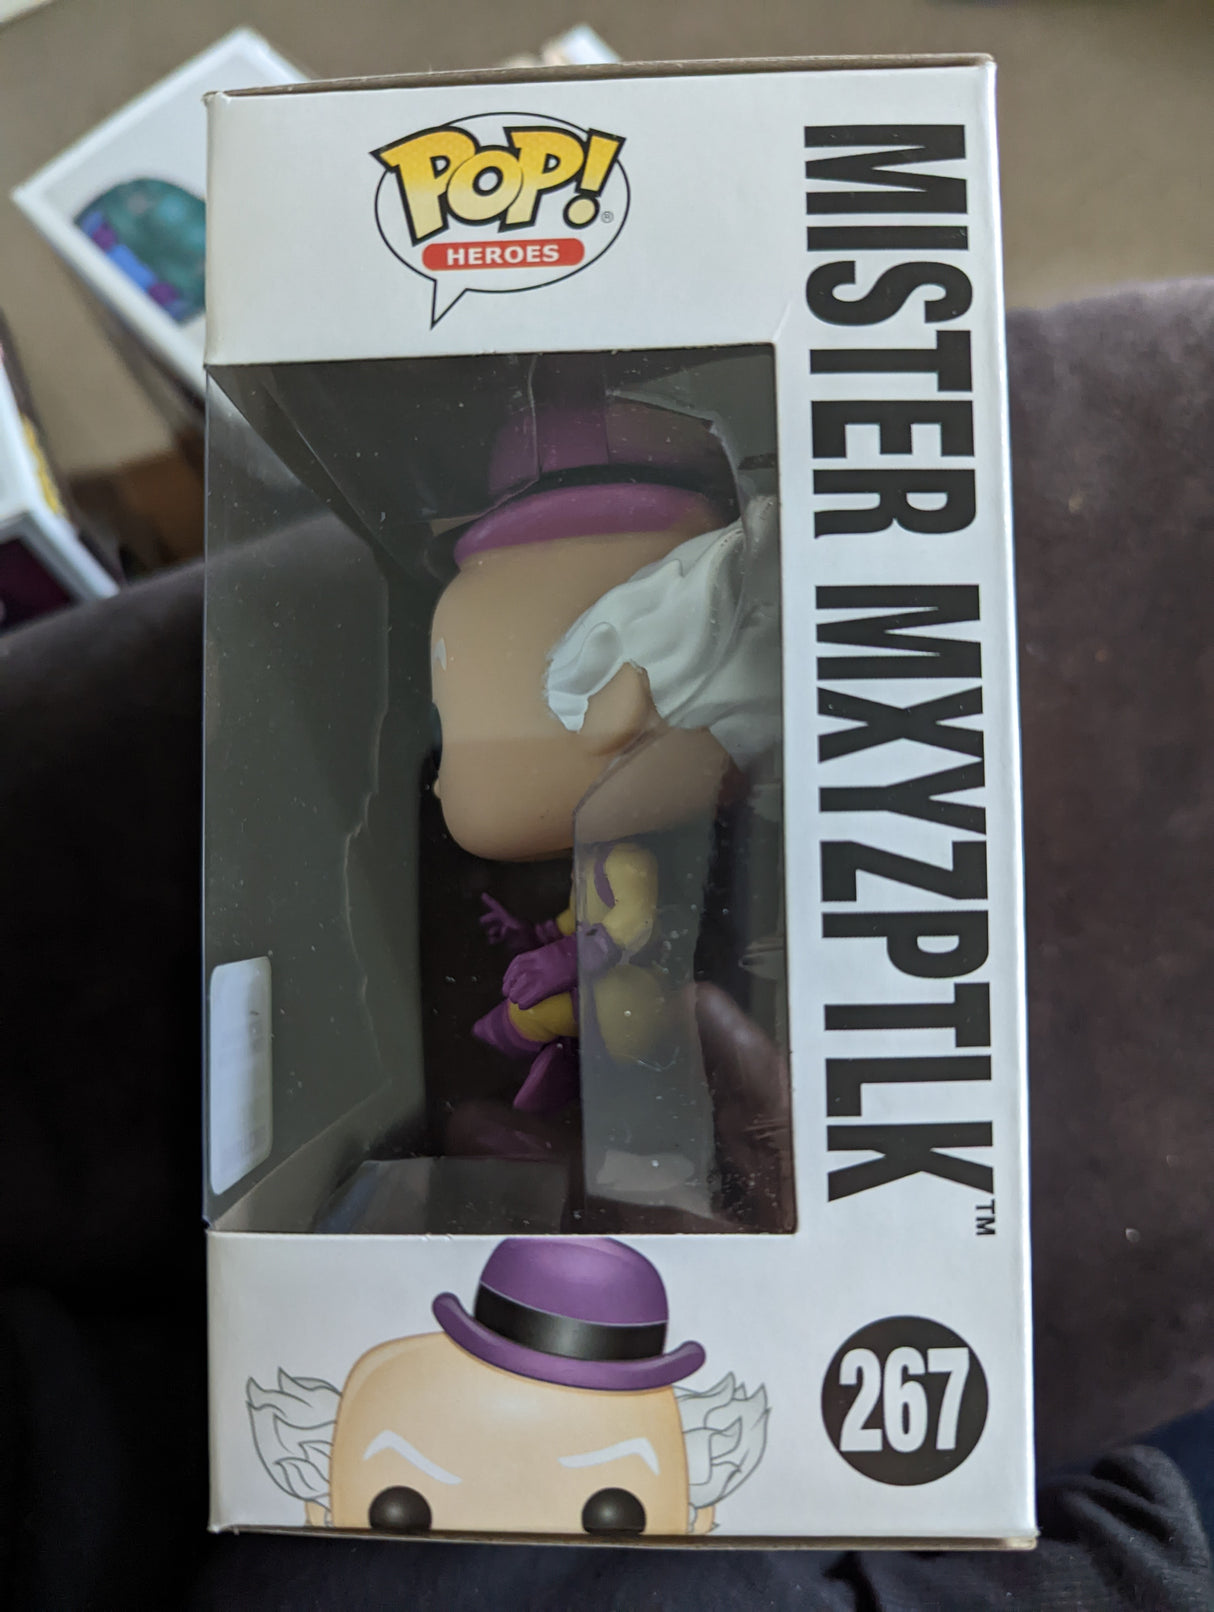 Damaged Box | Funko Pop Heroes | DC Super Heroes | Mister Mxyzptlk #267 | 2019 Spring Convention Exclusive Limited Edition (6999297982564)